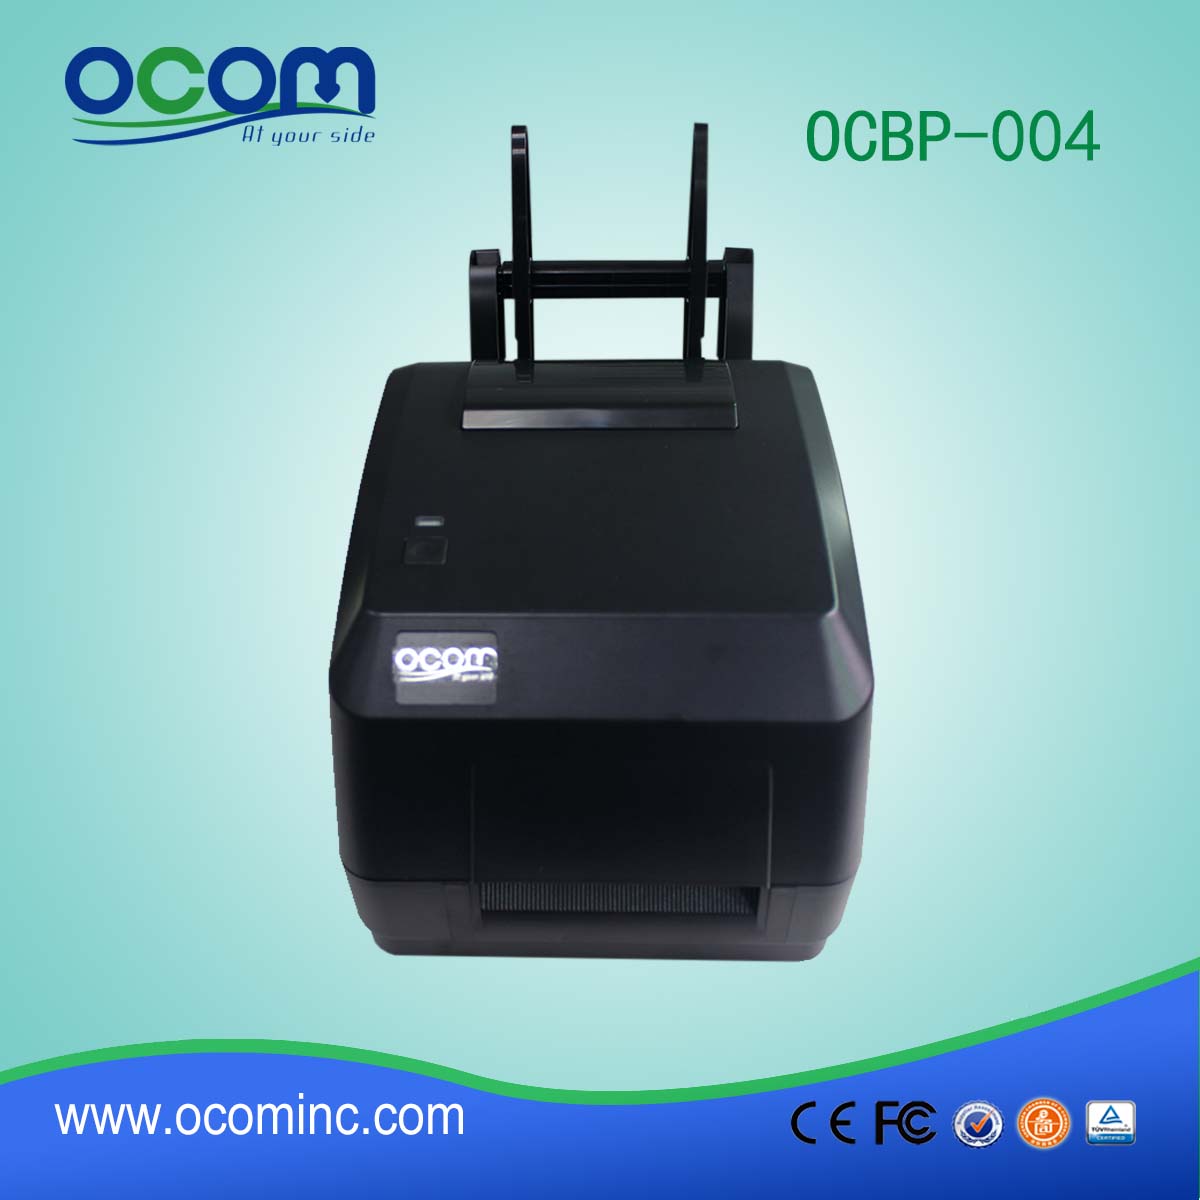 4 Inch Thermal Transfer Printer for Barcode Label printing